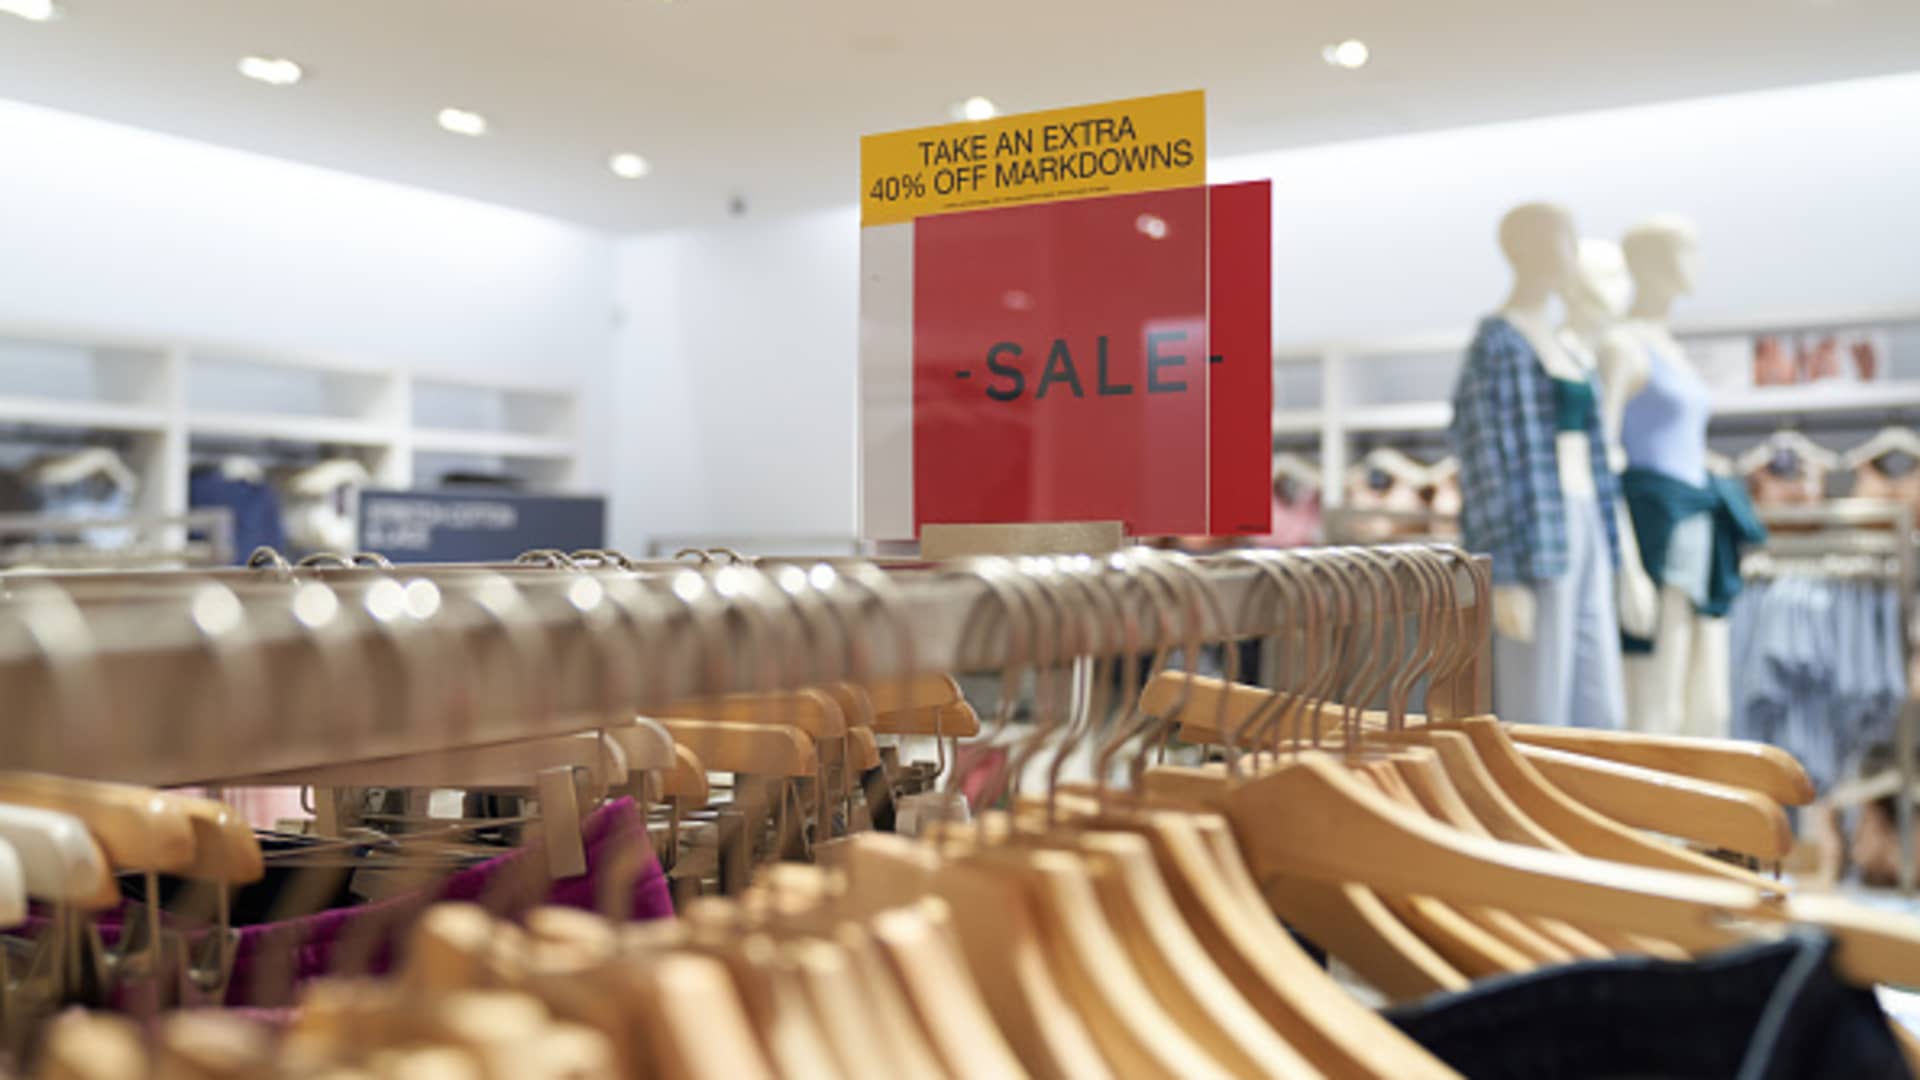 Retailers’ biggest holiday wish is to get rid of all that excess inventory